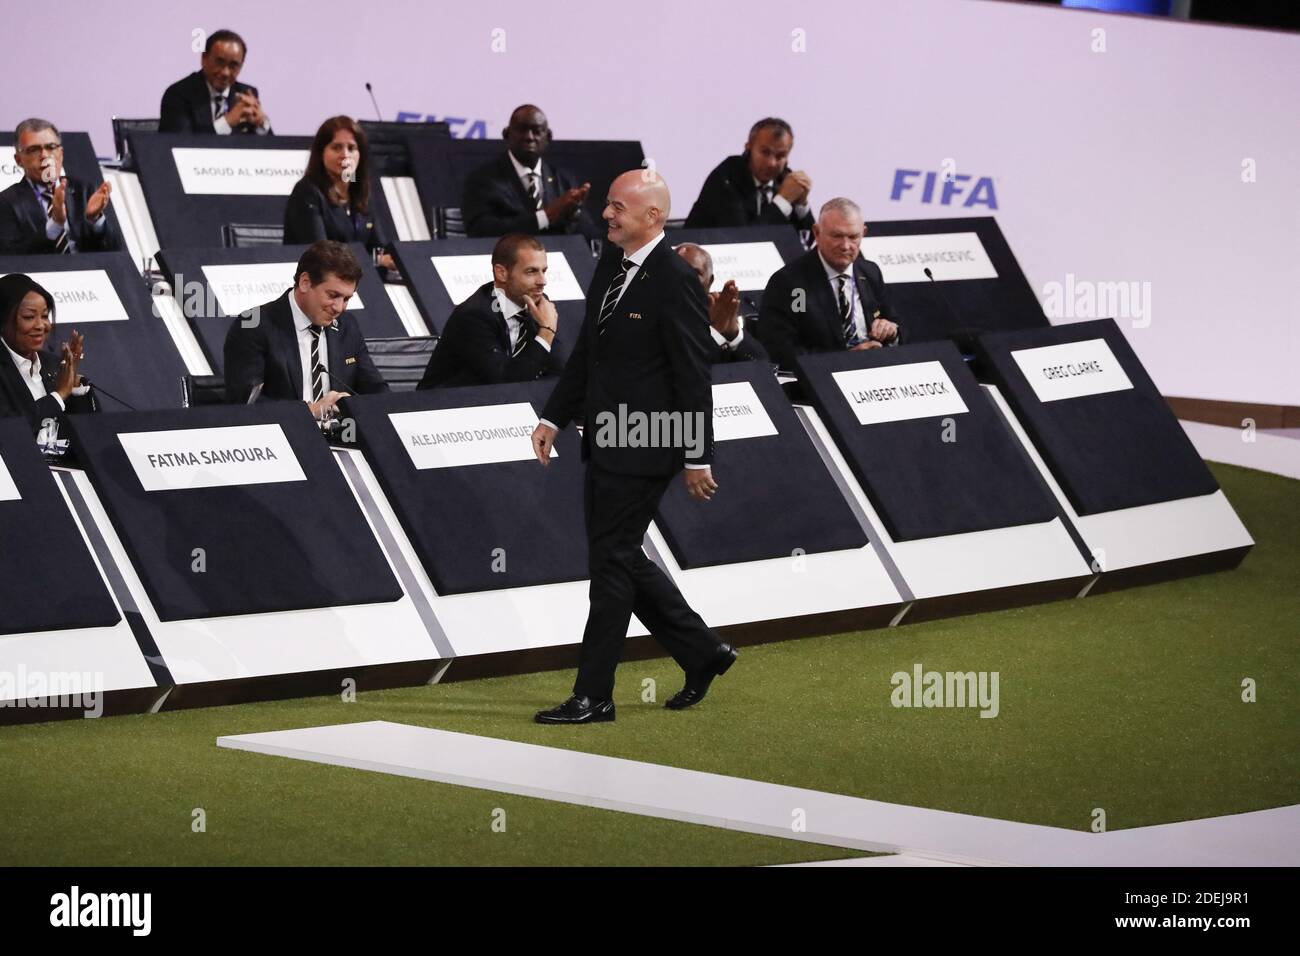 FIFA President Gianni Infantino during the 69th FIFA Congress at Paris Expo,  Porte de Versailles in Paris on June 5, 2019. Gianni Infantino was  re-elected by acclamation for a second term as